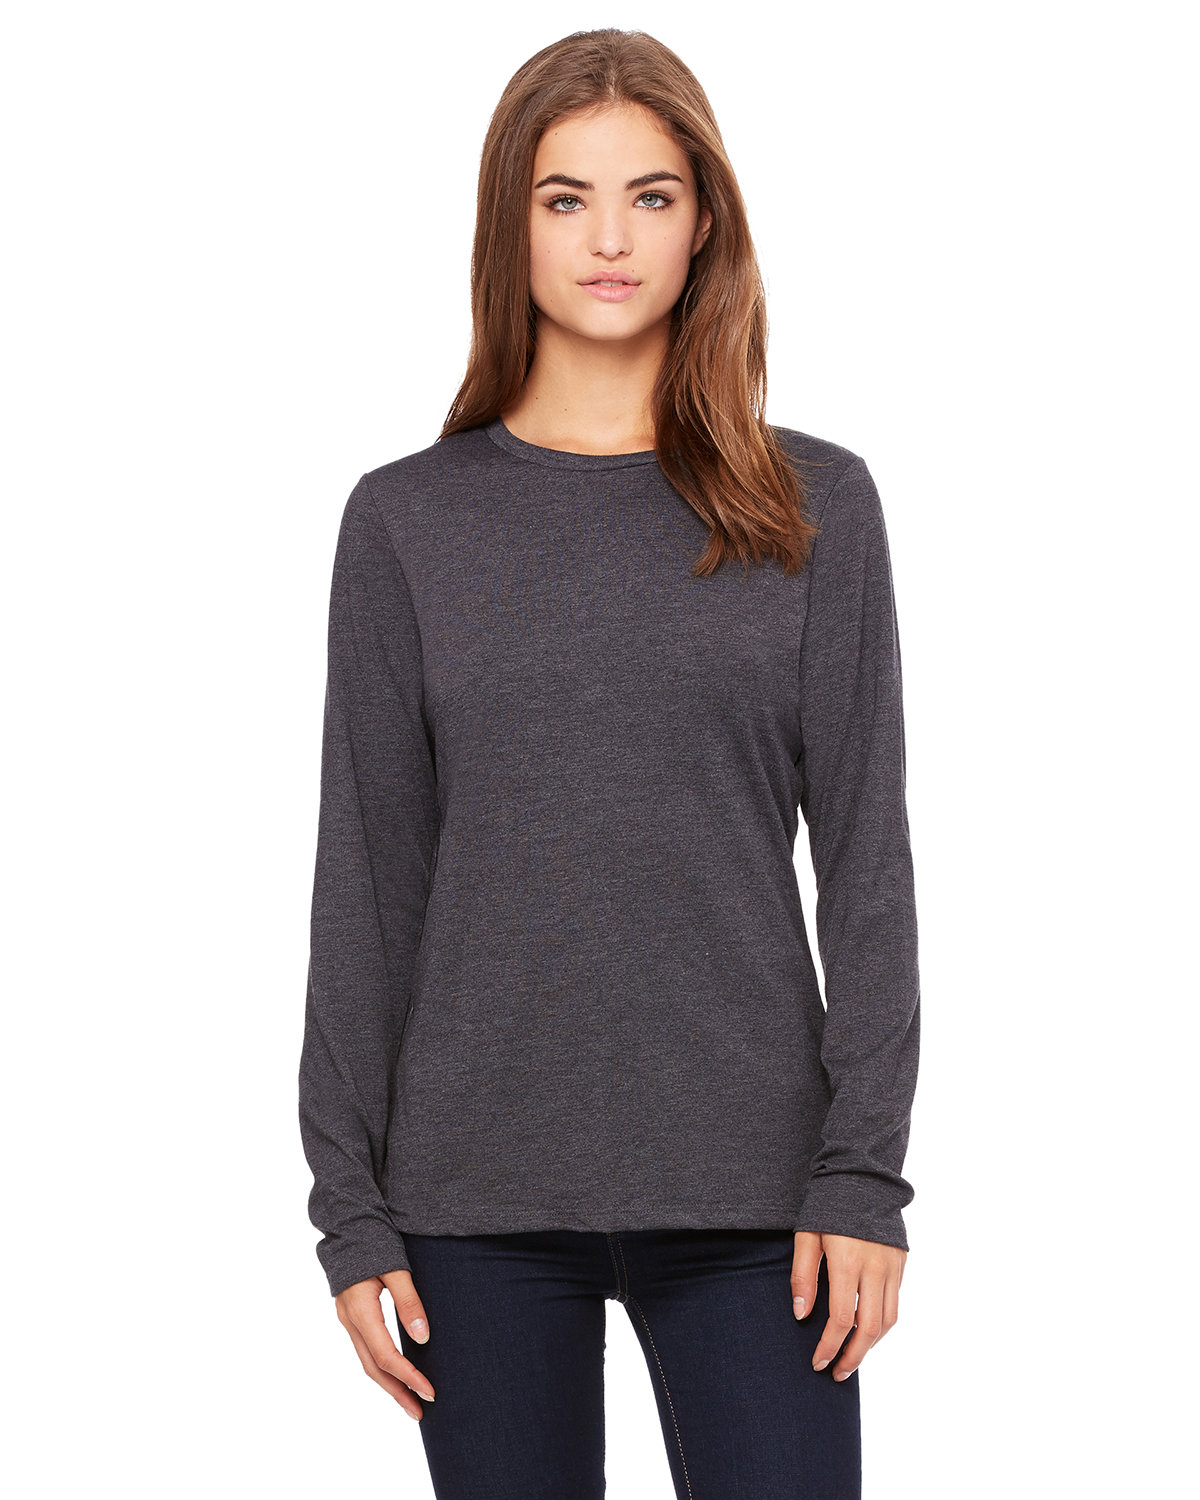 Bella + Canvas Ladies' Relaxed Jersey Long-Sleeve T-Shirt DARK GRY HEATHER 